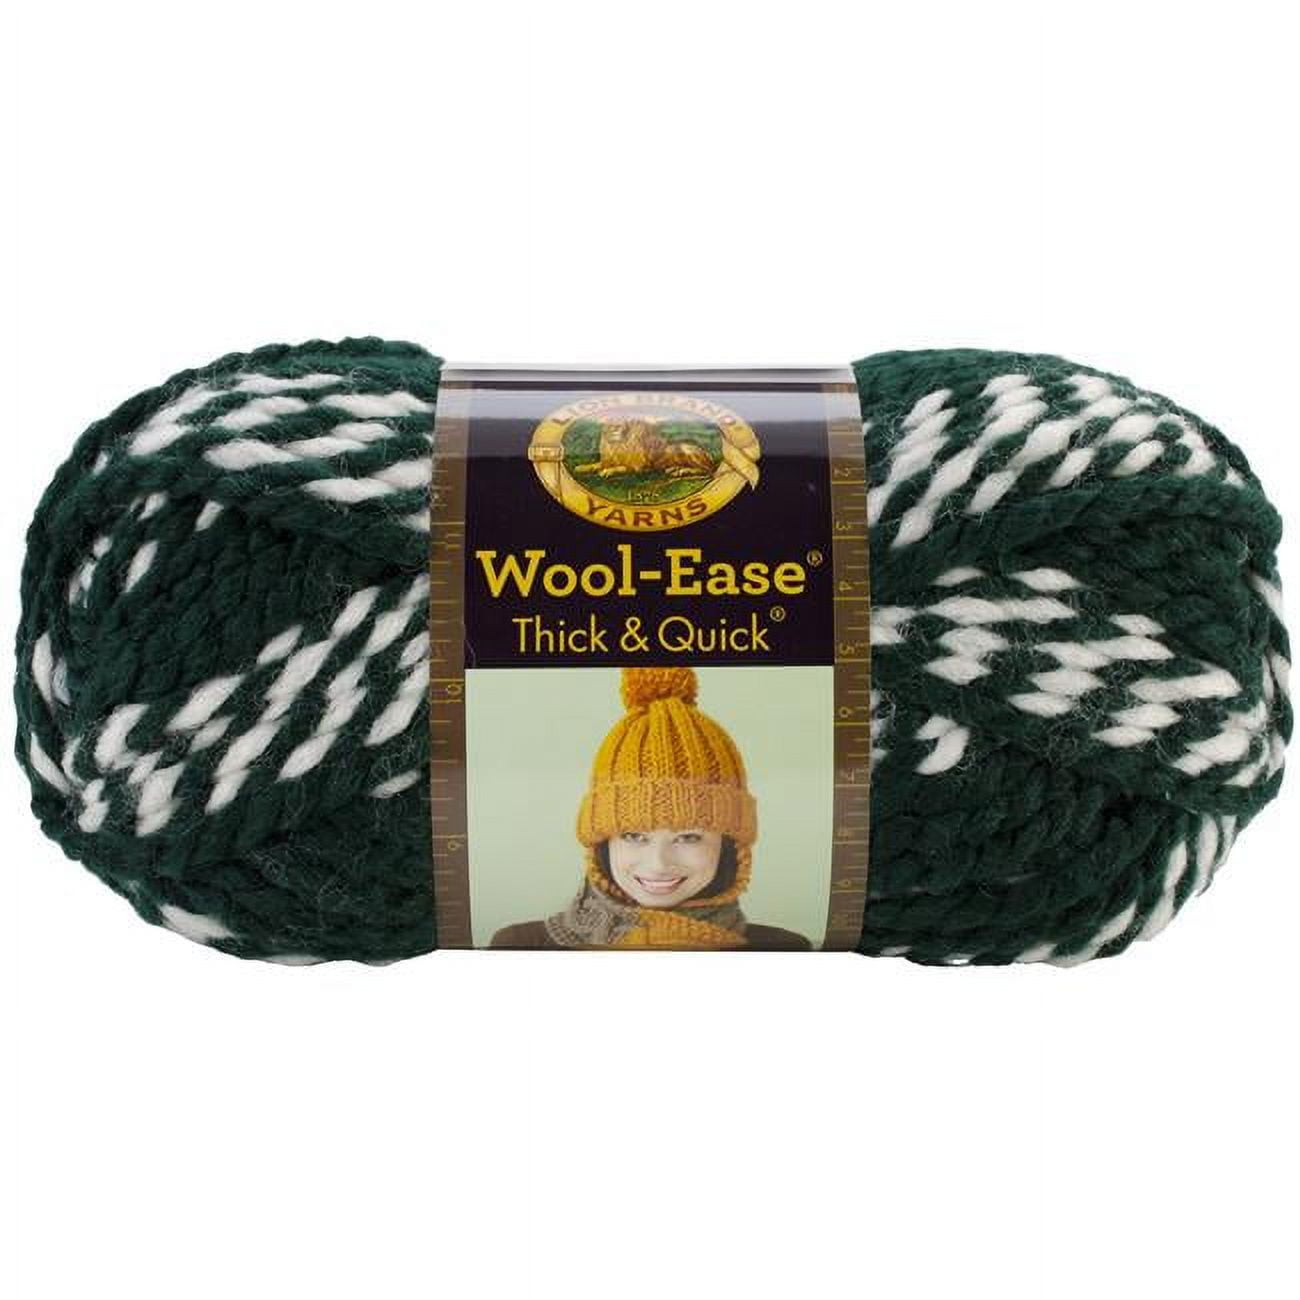 (3 Pack) Lion Brand Yarn 640-609 Wool-Ease Thick and Quick Yarn, Moonlight